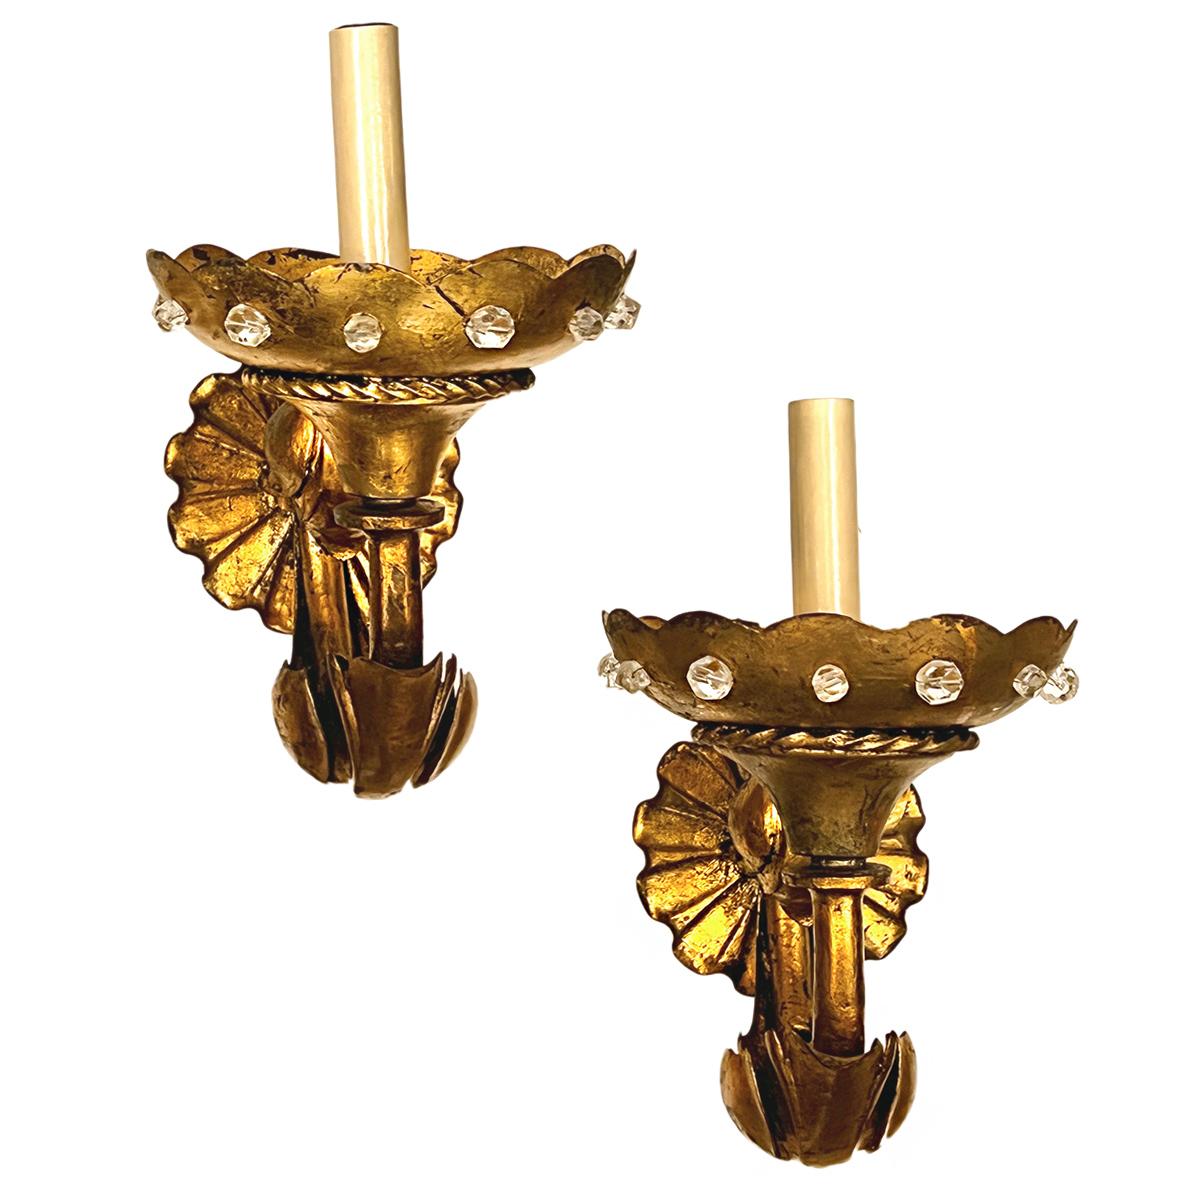 A pair of circa 1920's French single arm sconces with crystal beads on body and original patina.

Measurements:
Height: 10